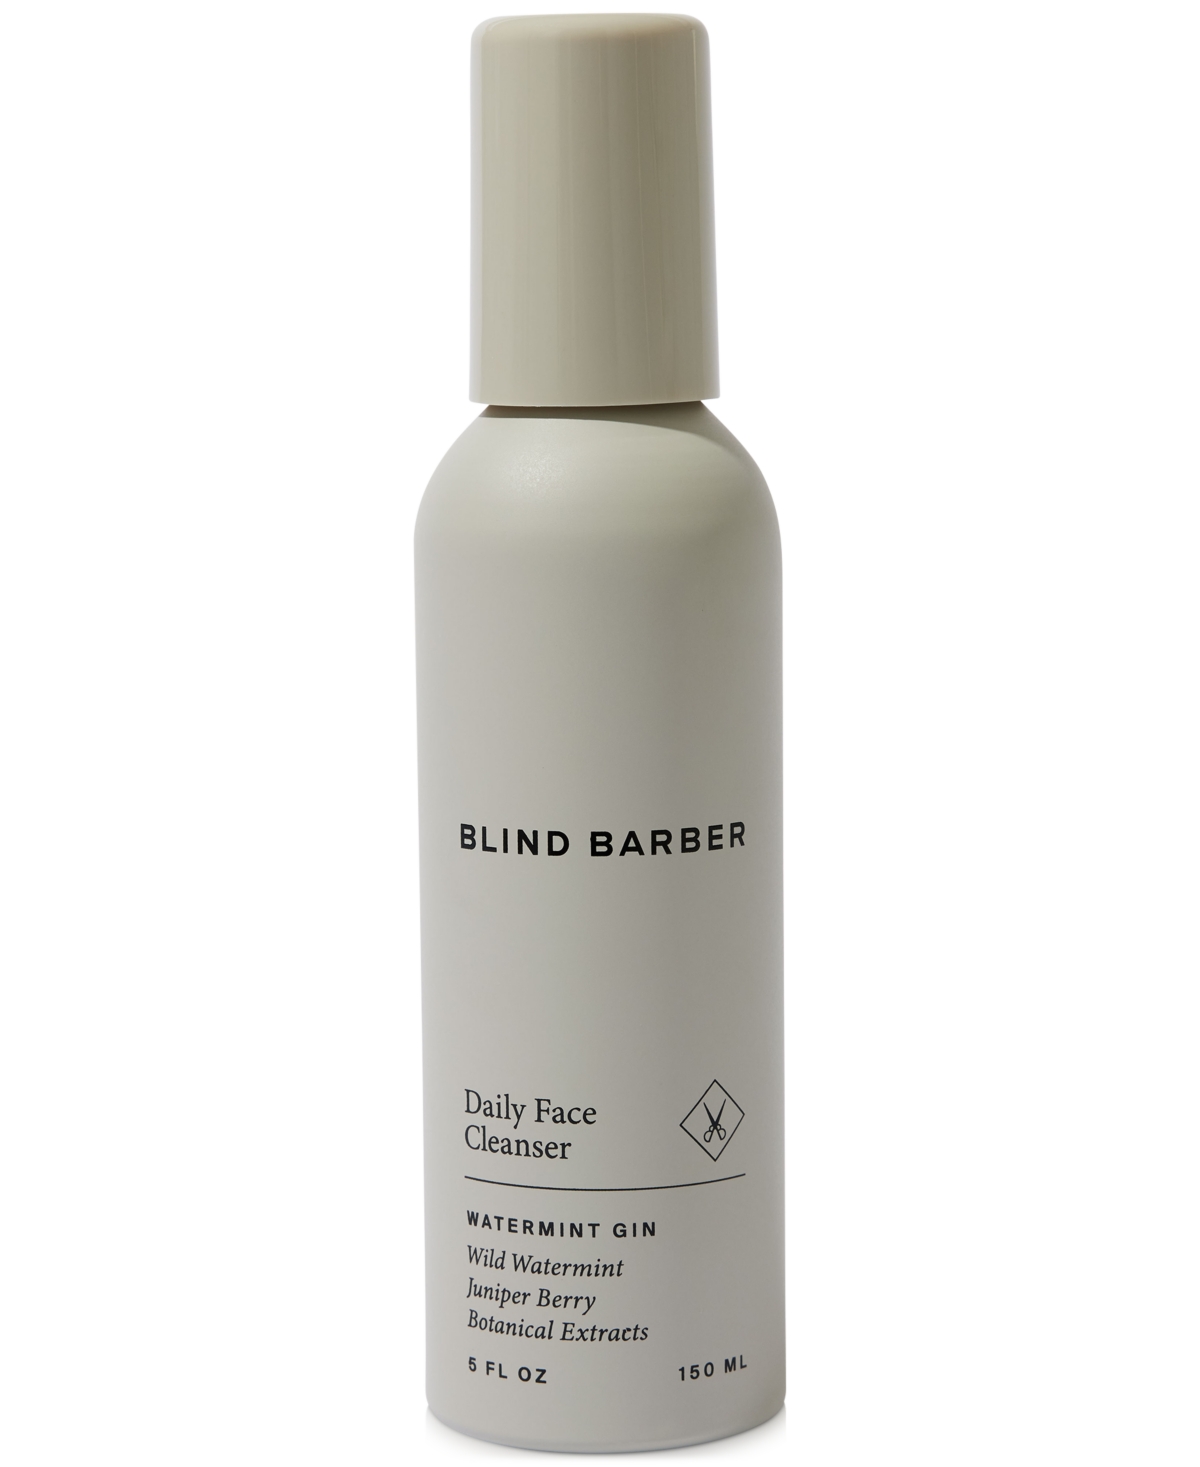 Blind Barber Watermint Gin Daily Face Cleanser, 5-oz.